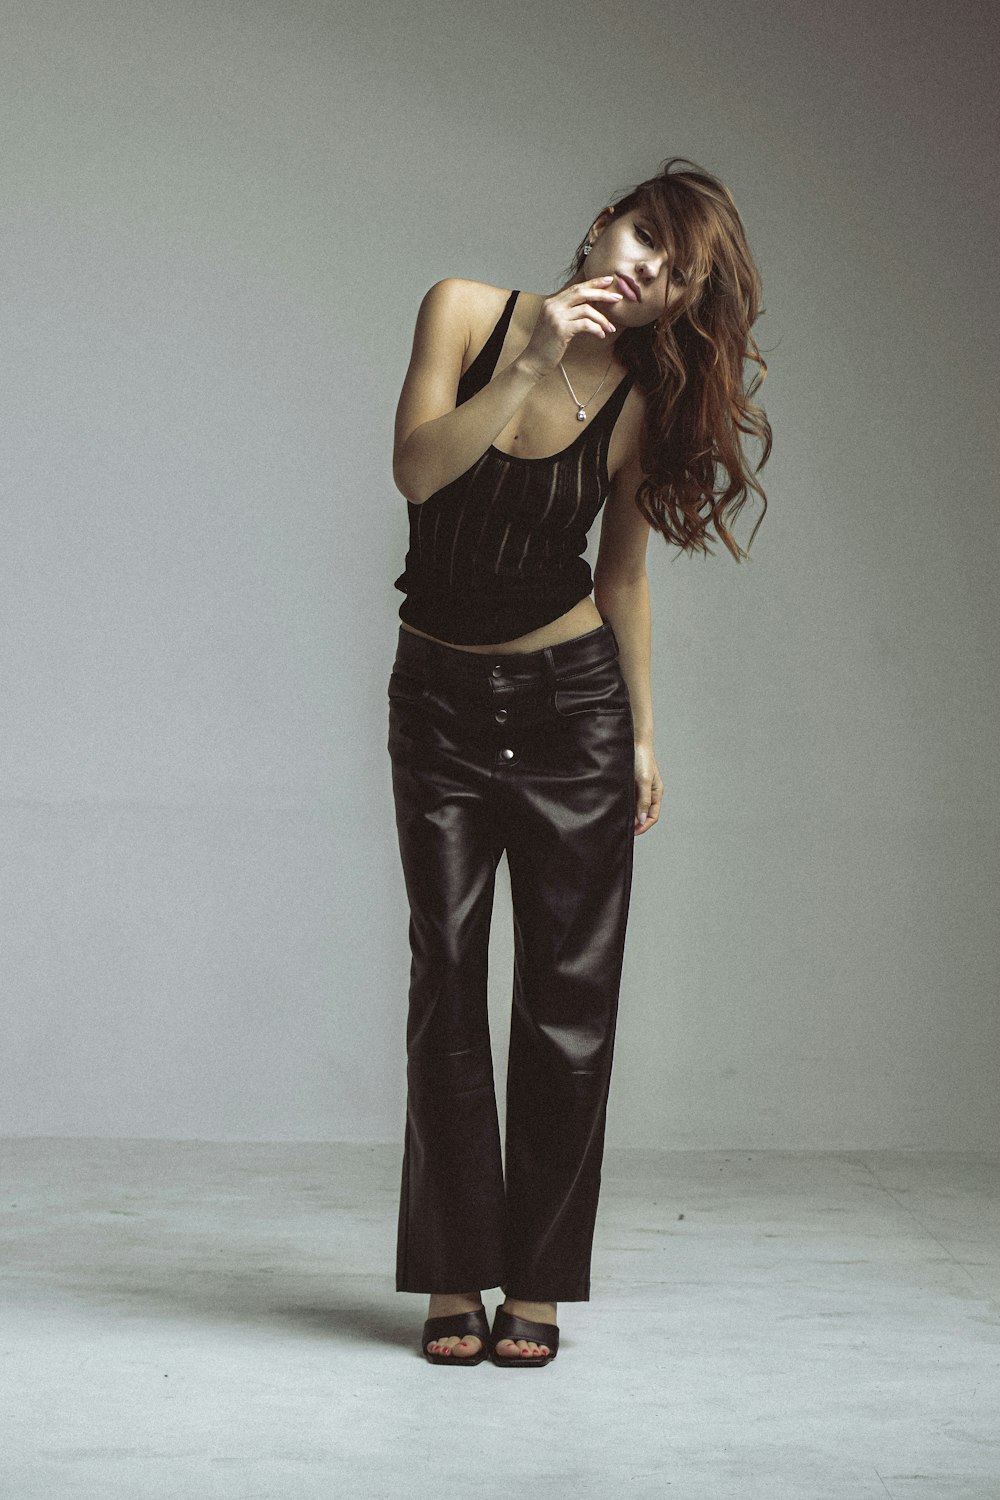 a woman posing in a black top and leather pants